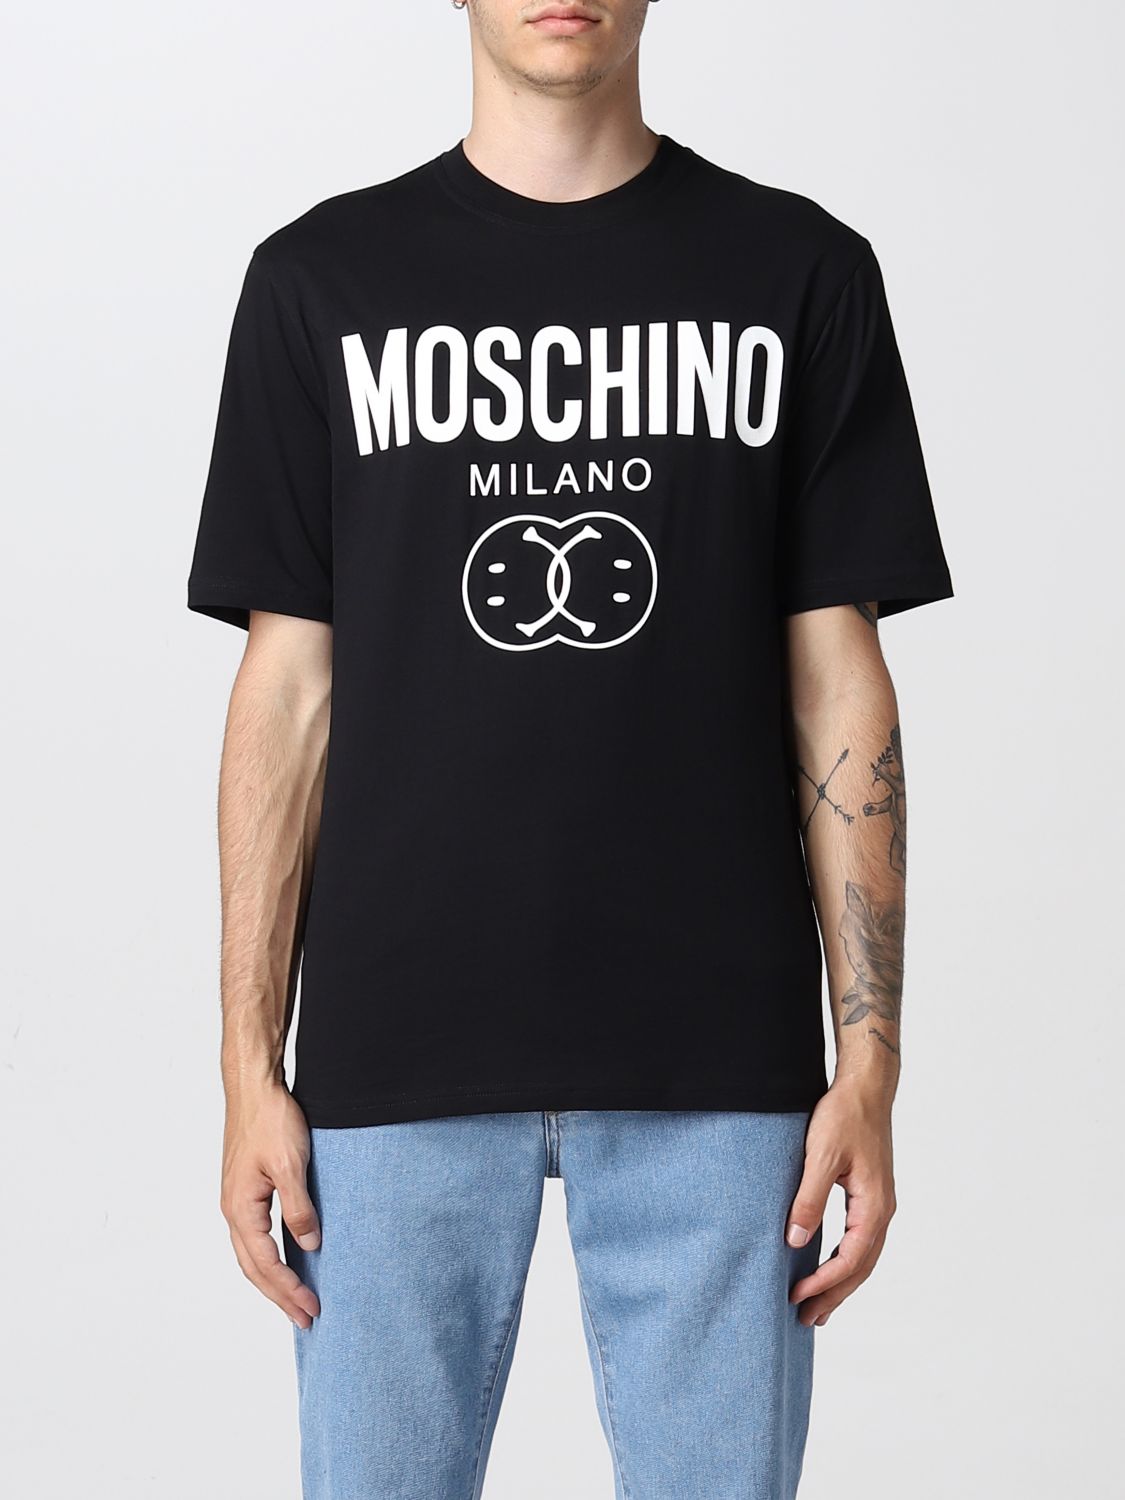 Moschino Couture Outlet: Double Smiley® t-shirt - Black | Moschino t-shirt 07257041 online on GIGLIO.COM